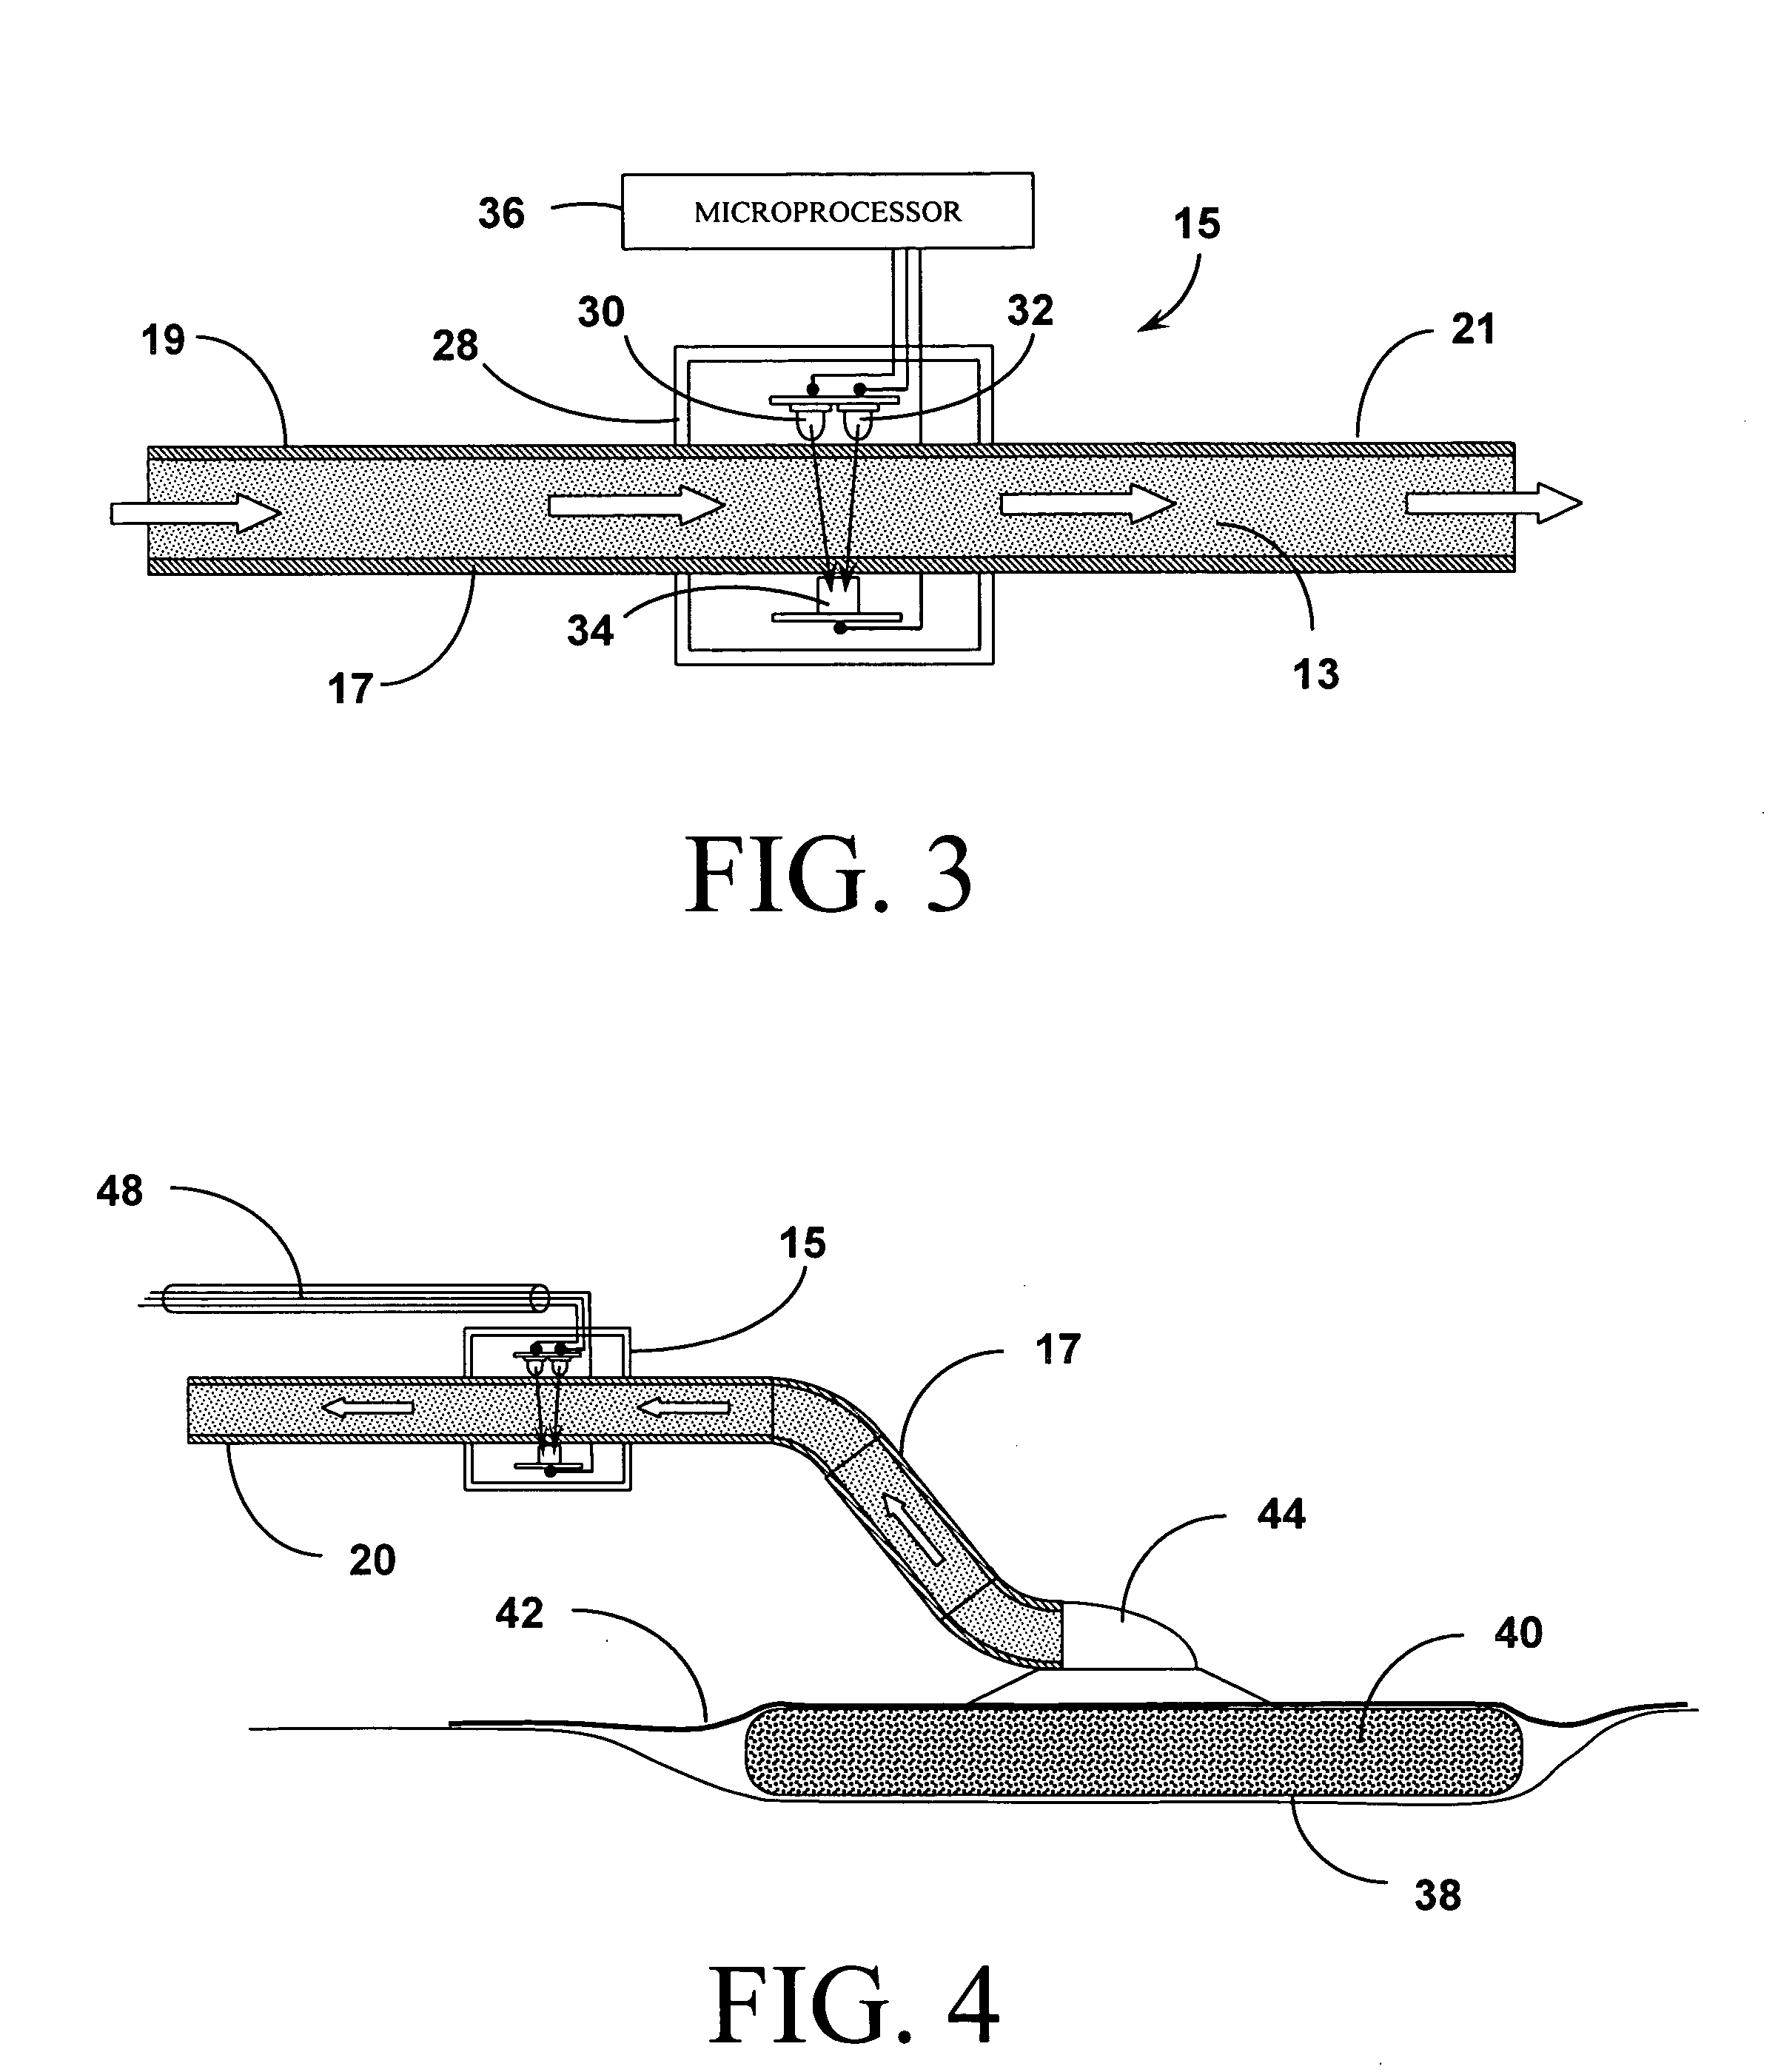 Systems and methods for detection of wound fluid blood and application of phototherapy in conjunction with reduced pressure wound treatment system